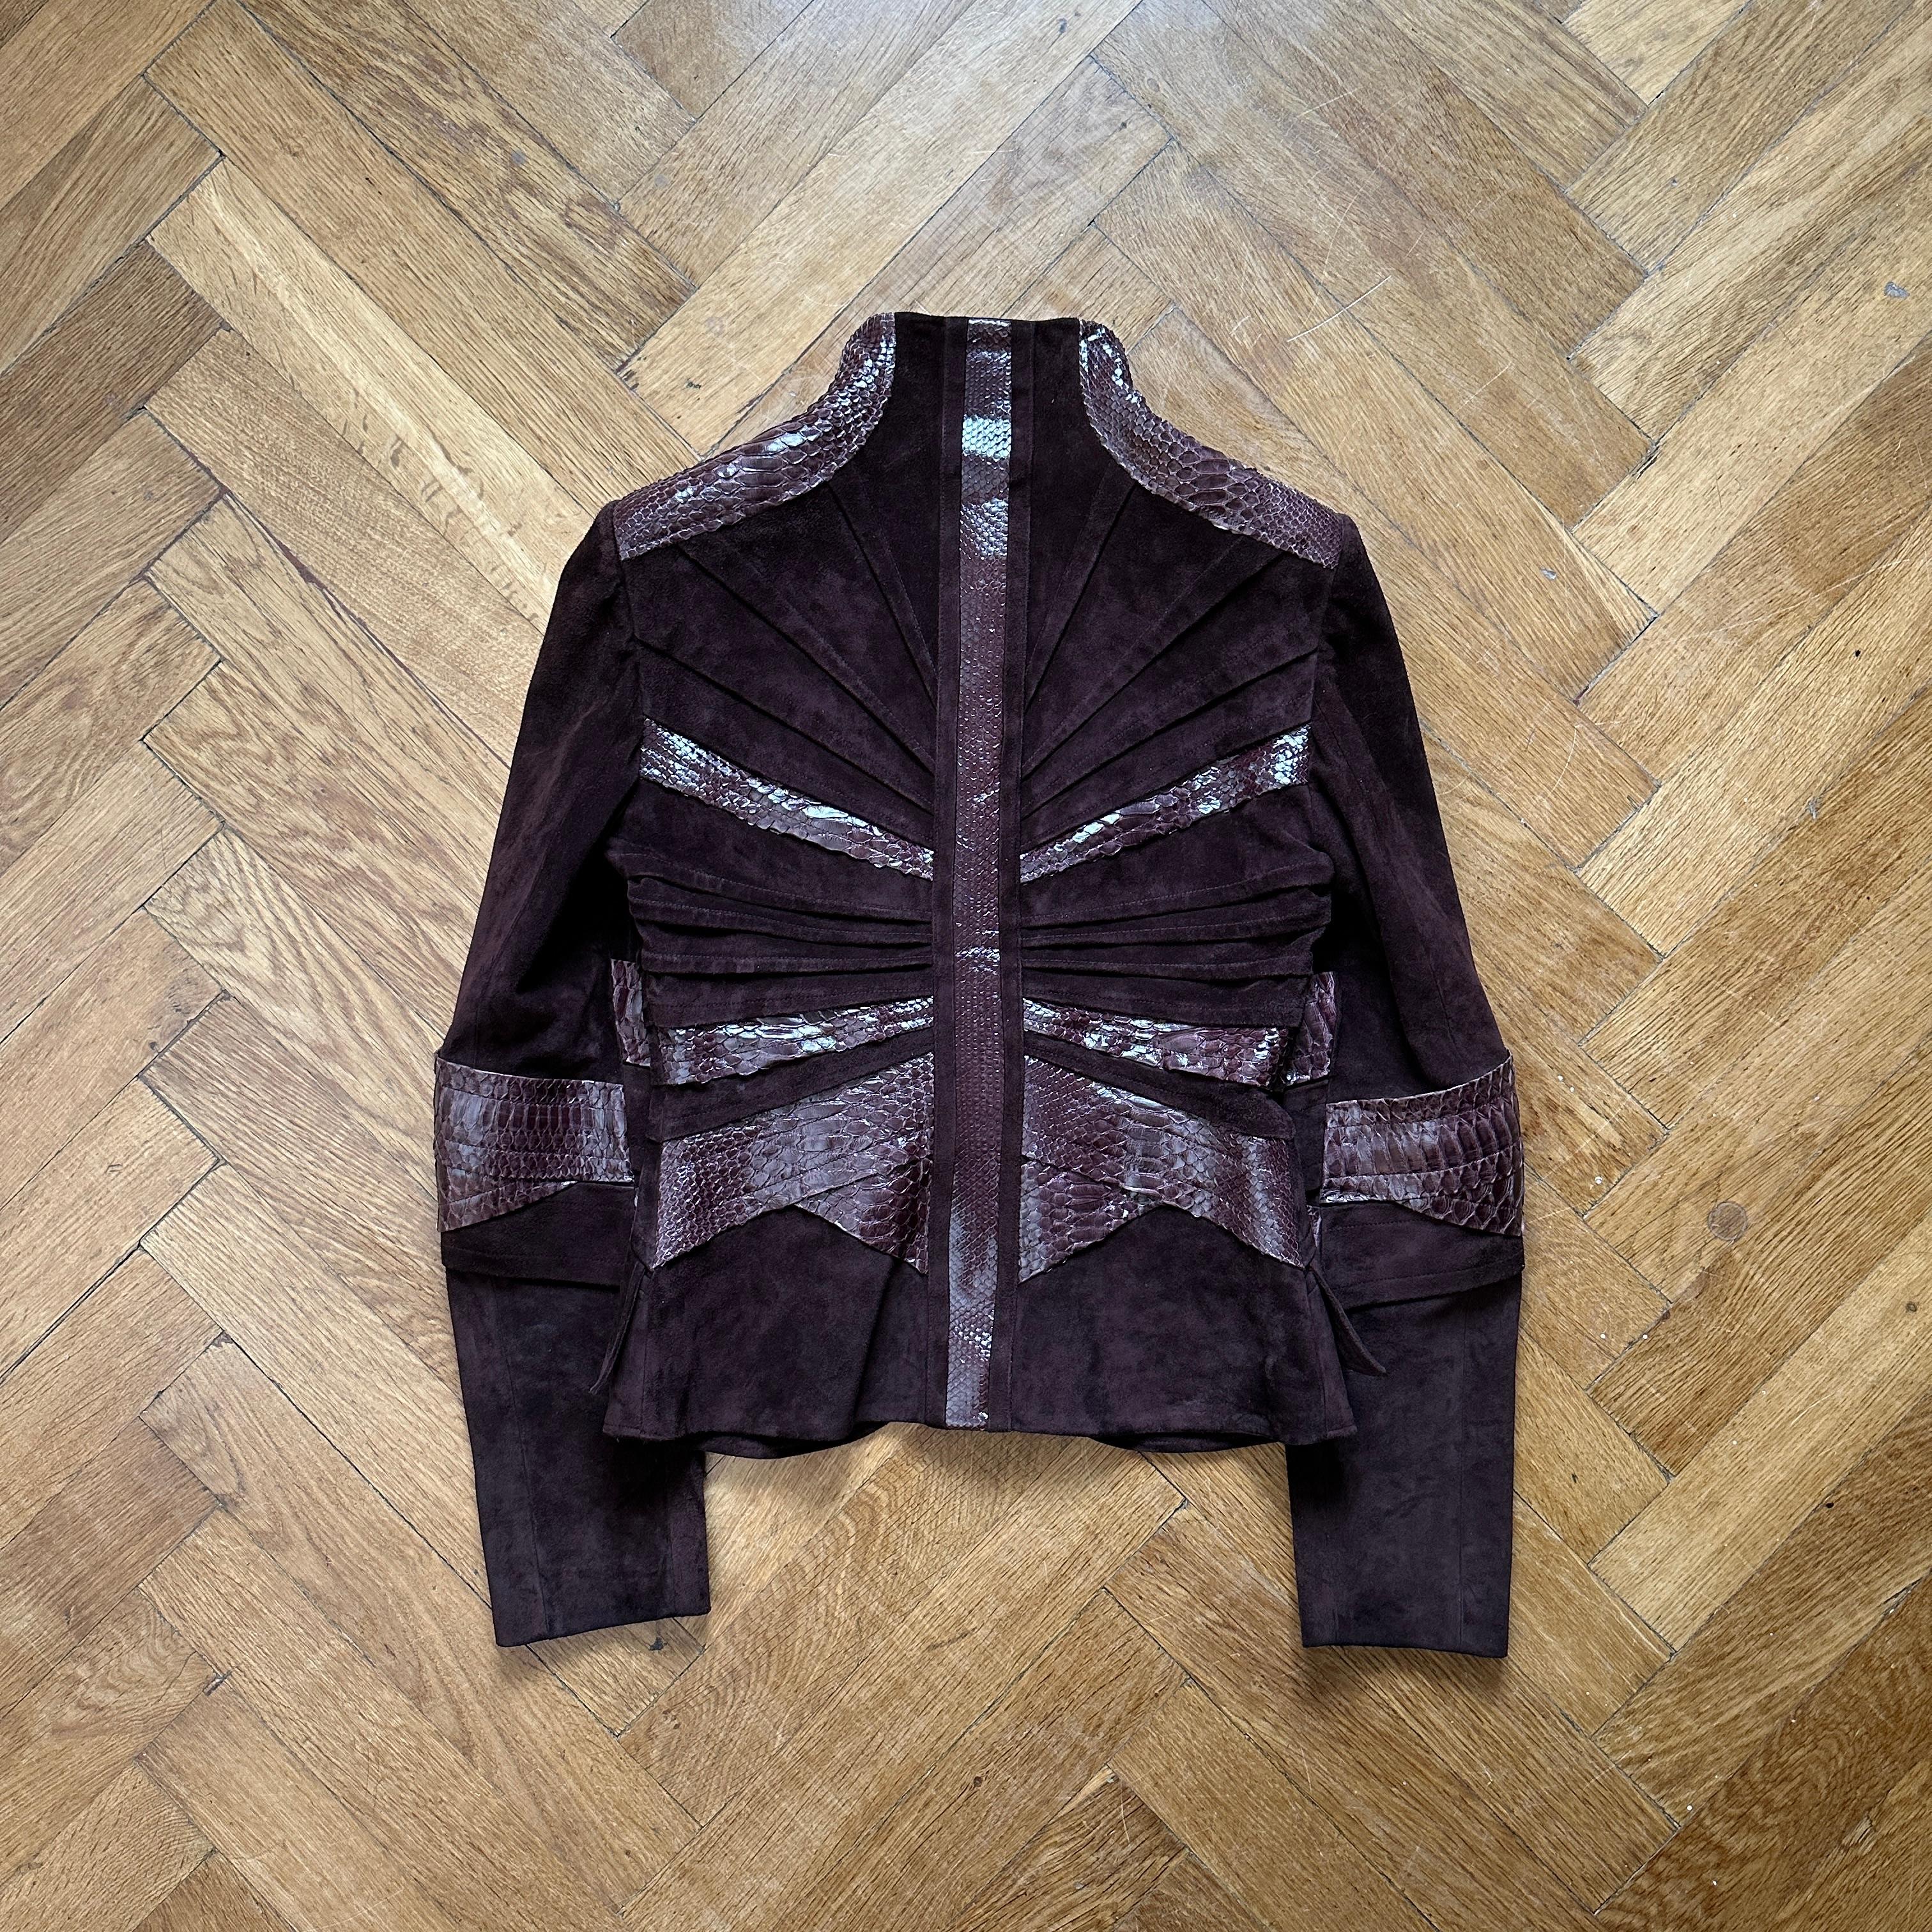 Gucci Spring/Summer 2004 Python Suede Paneled Jacket by Tom Ford 5